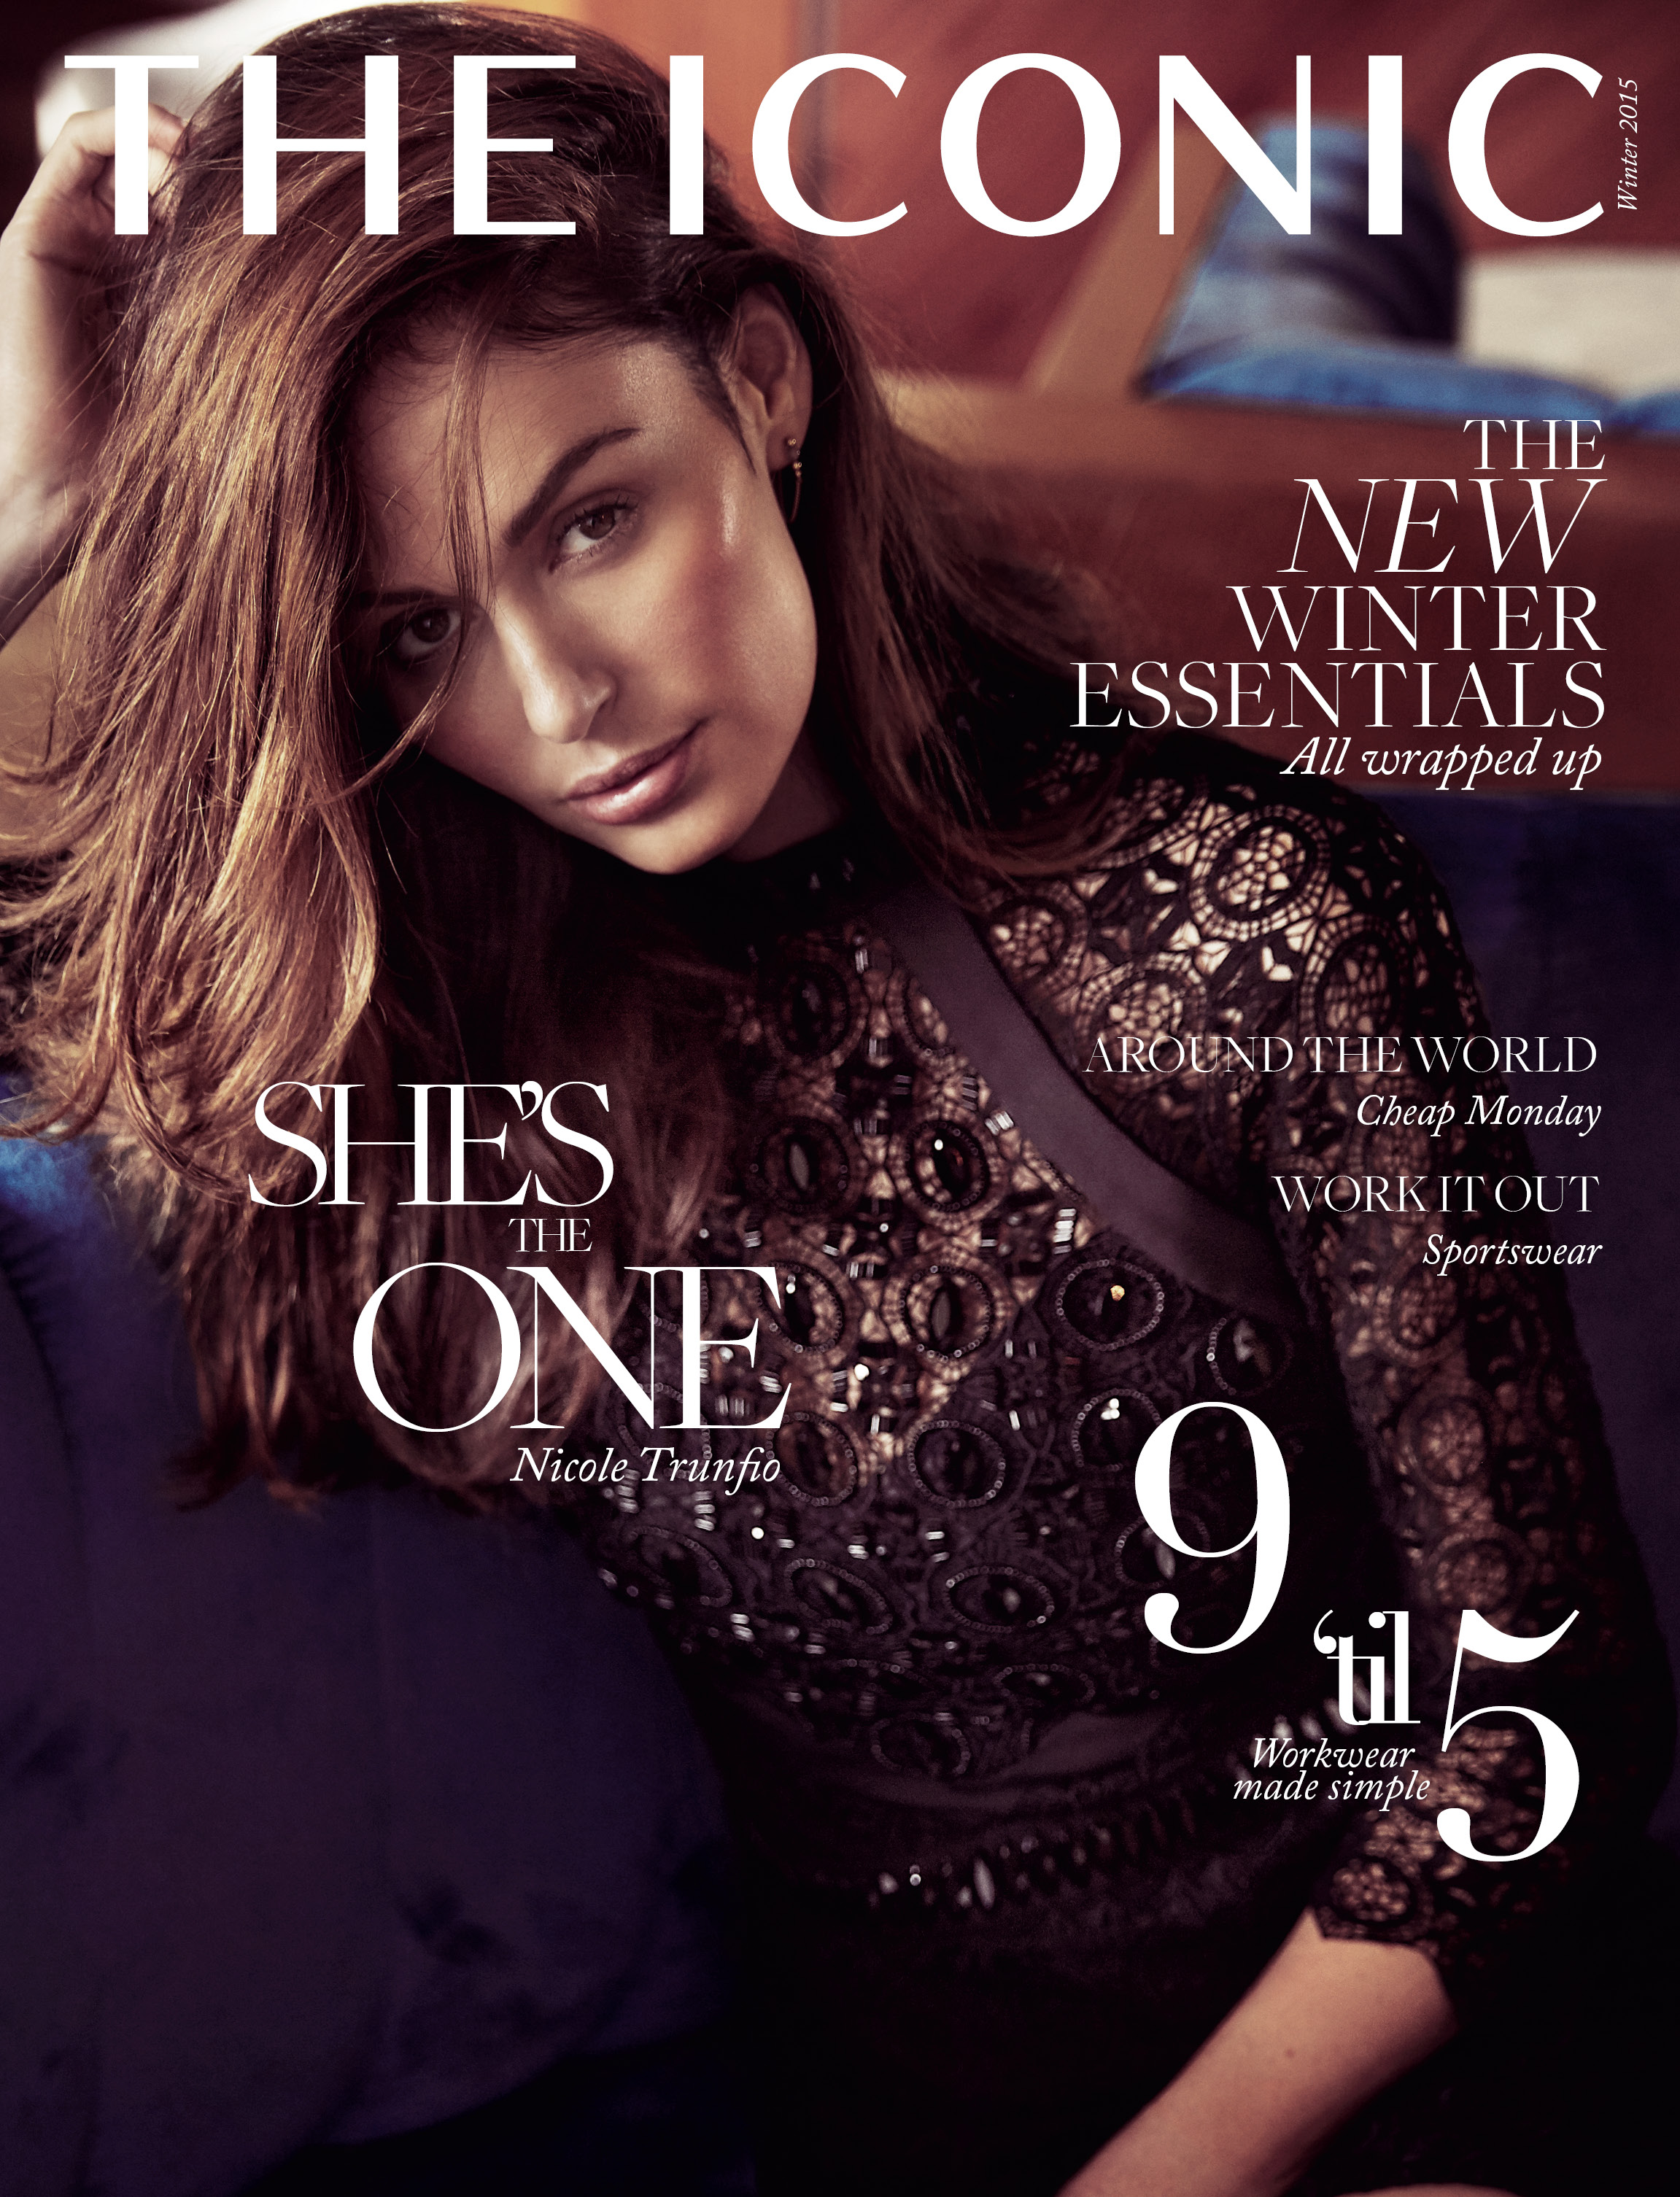 Online Fashion Retailer The Iconic Launches Magazine Featuring